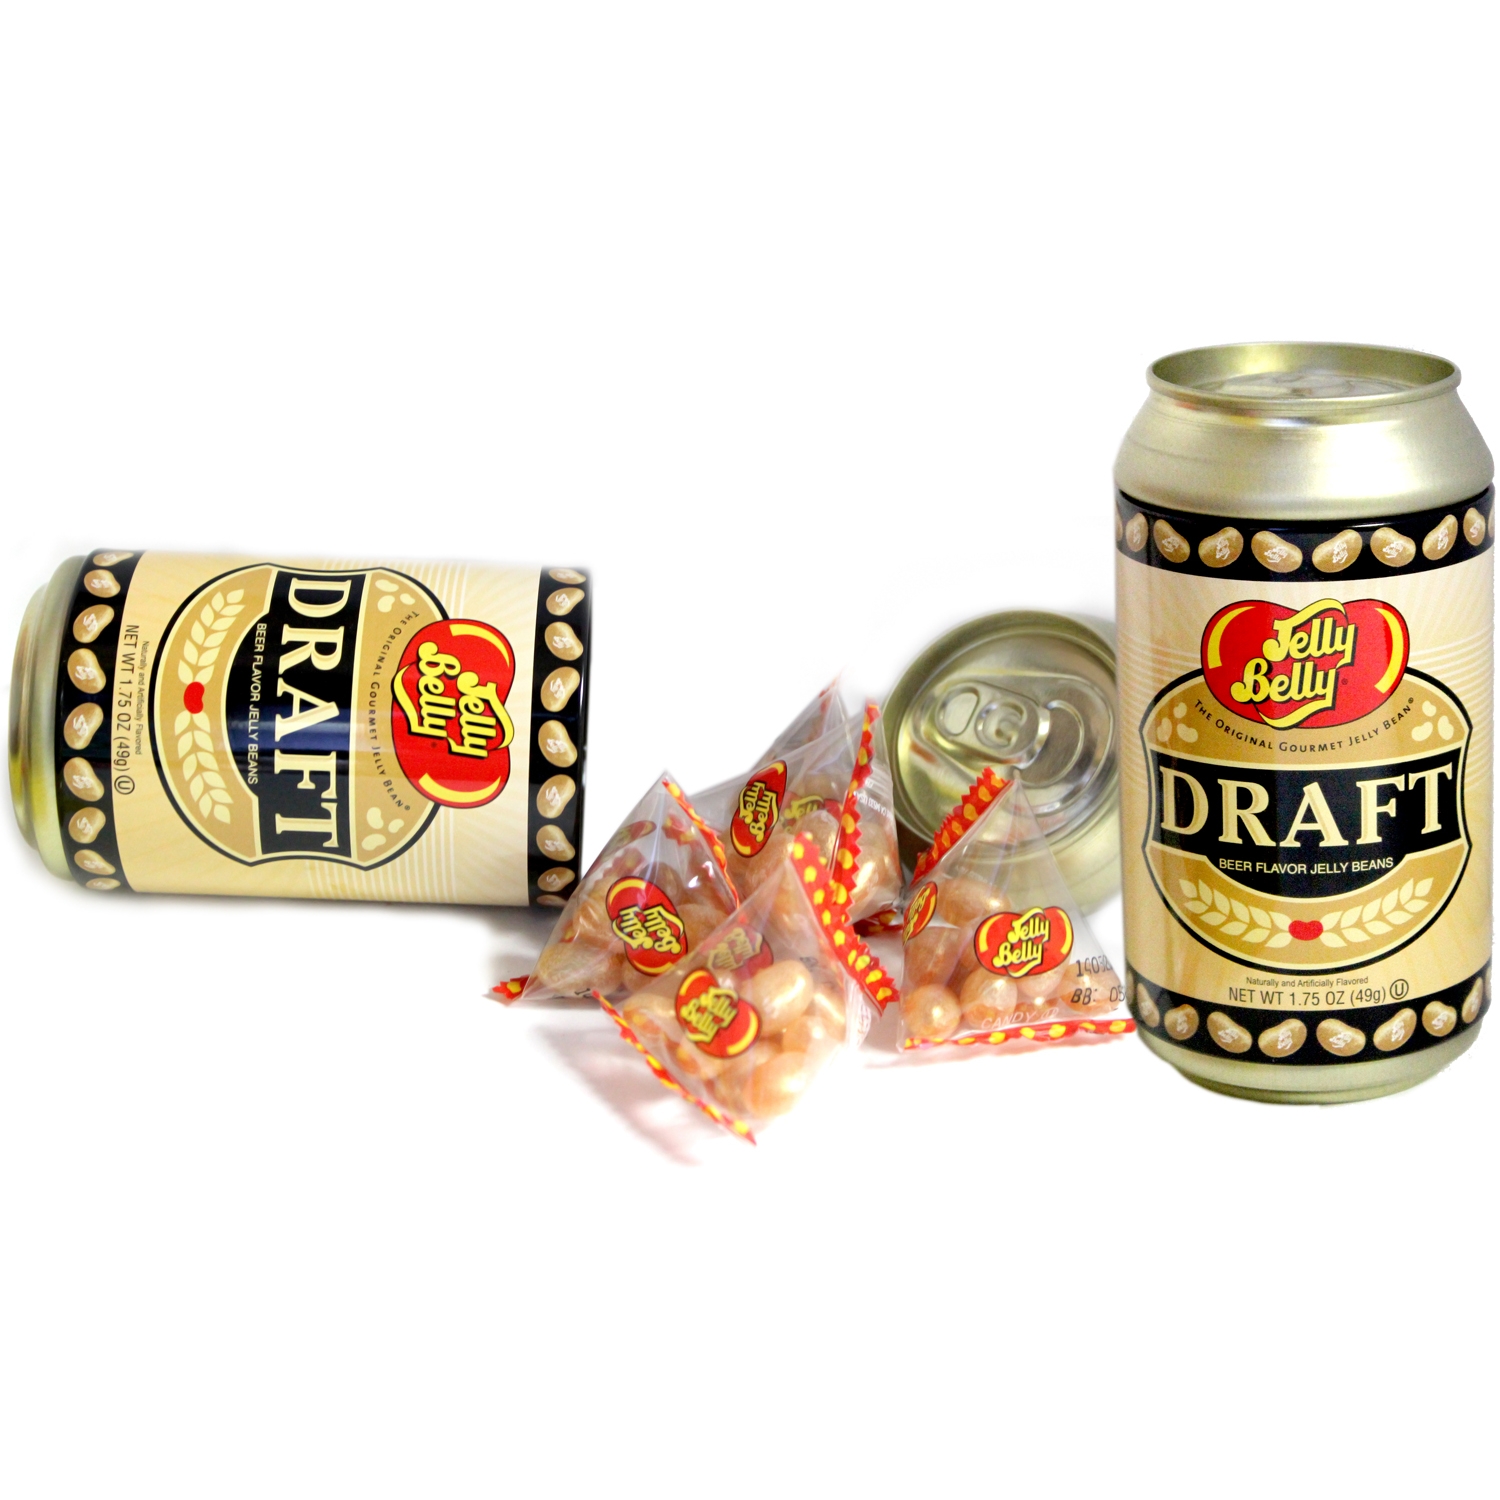     Draft Beer Can Tin  , 49  (Jelly Belly 62107)